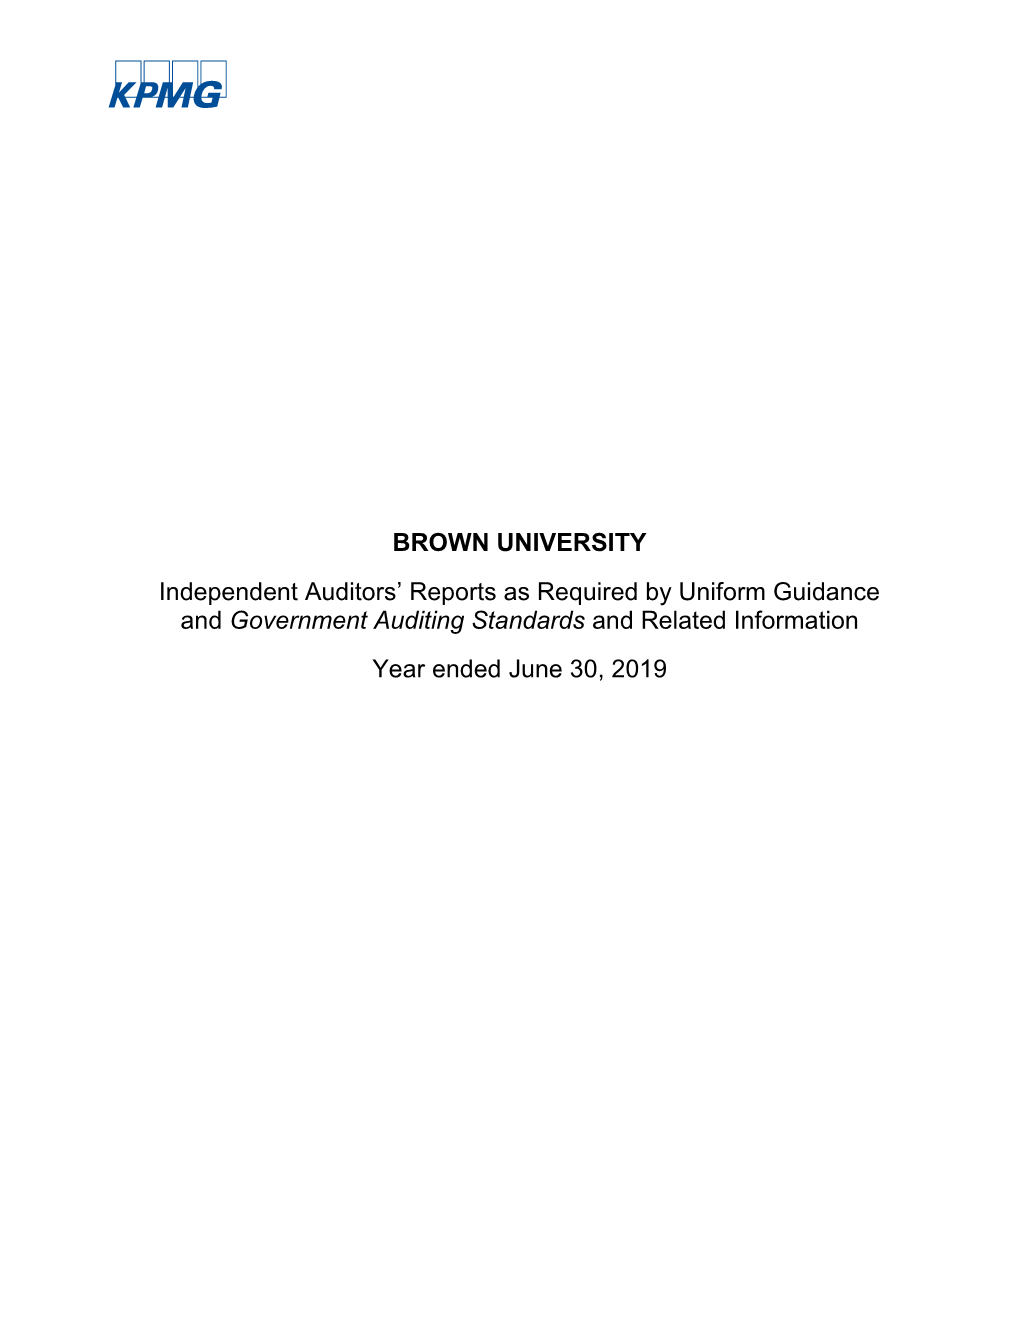 BROWN UNIVERSITY Independent Auditors' Reports As Required by Uniform Guidance and Government Auditing Standards and Related I